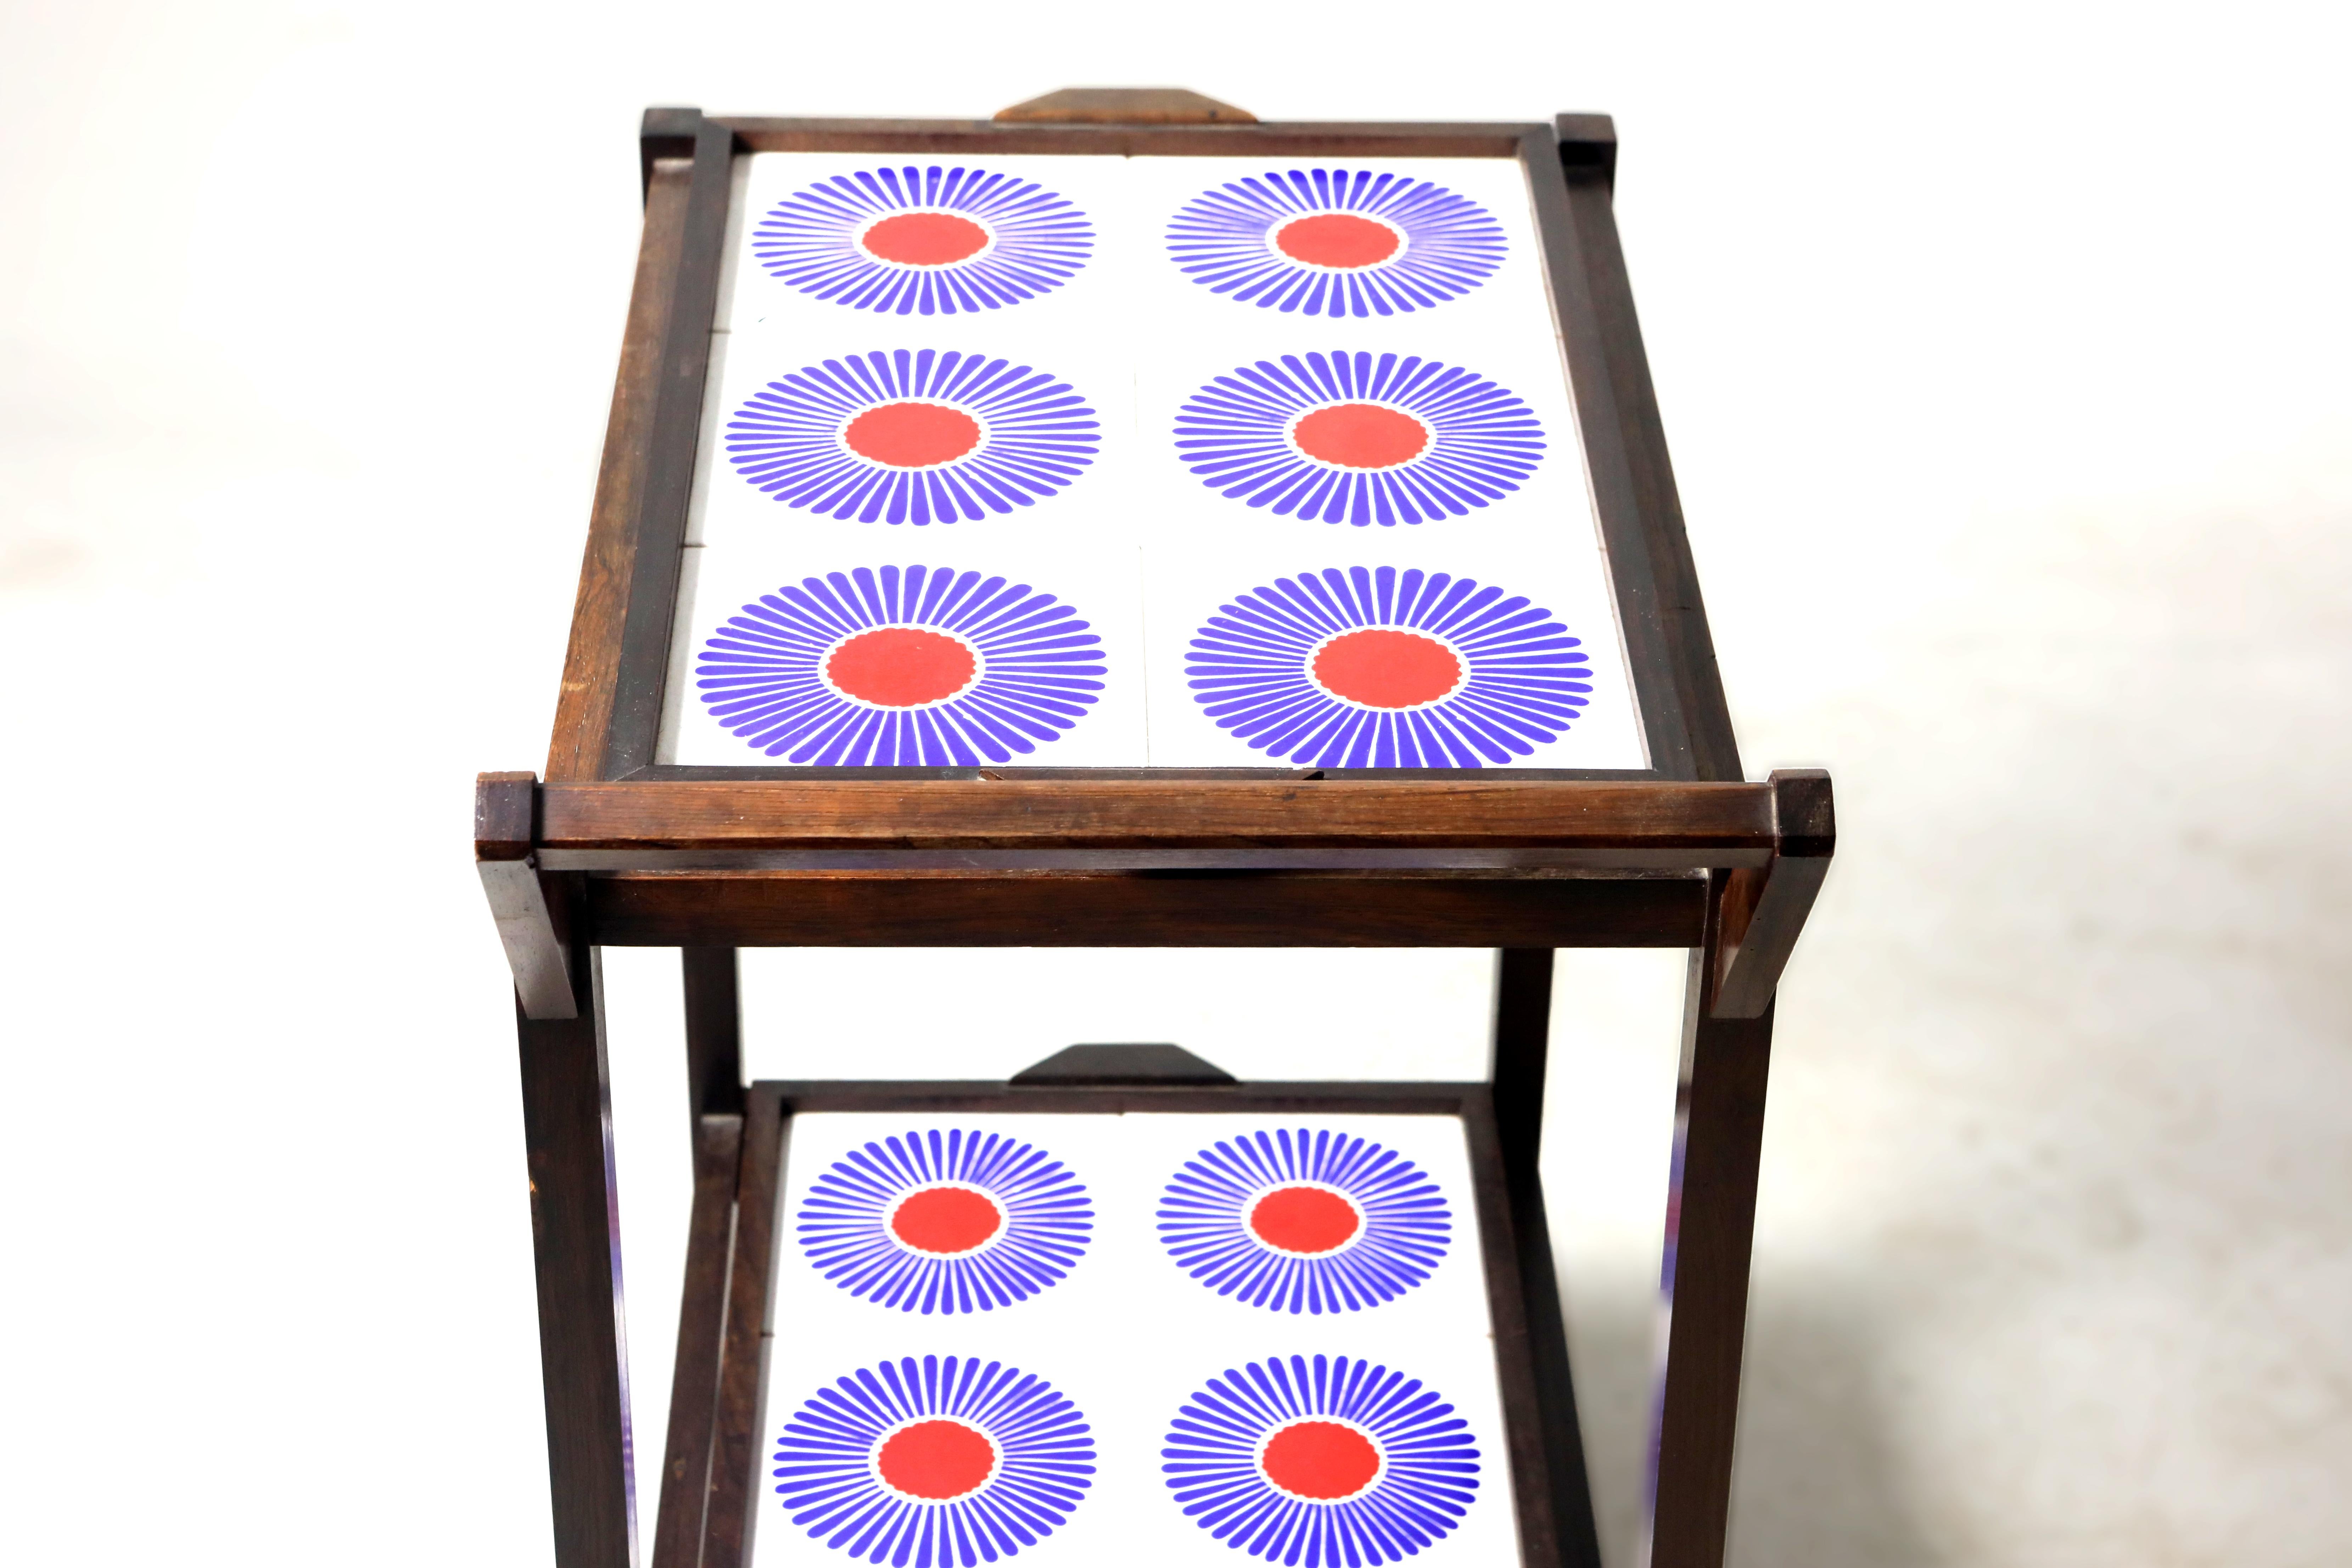 Varnished Brazilian Mid-Century Modern Tiled Tea-Cart with Removable Trays, Brazil, 1960s For Sale